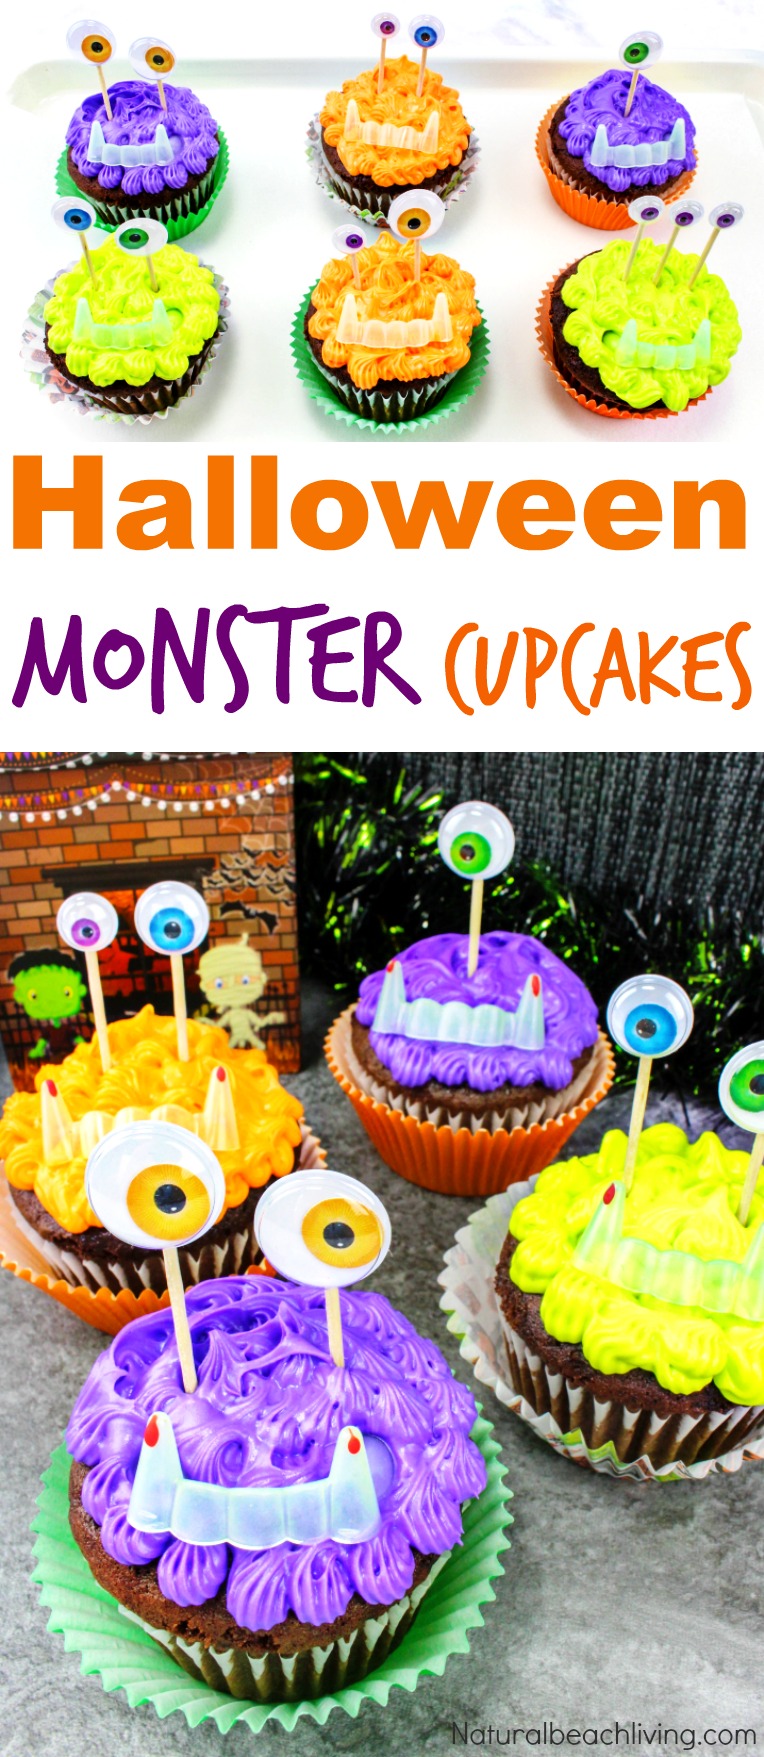 25+ Healthy Halloween Snacks, These Easy and Fun Halloween Snacks are perfect for Halloween party treats, classroom party snacks, or just a fun recipe to help celebrate Halloween. Simple yet tasty Halloween snacks for kids. Kid approved snacks 